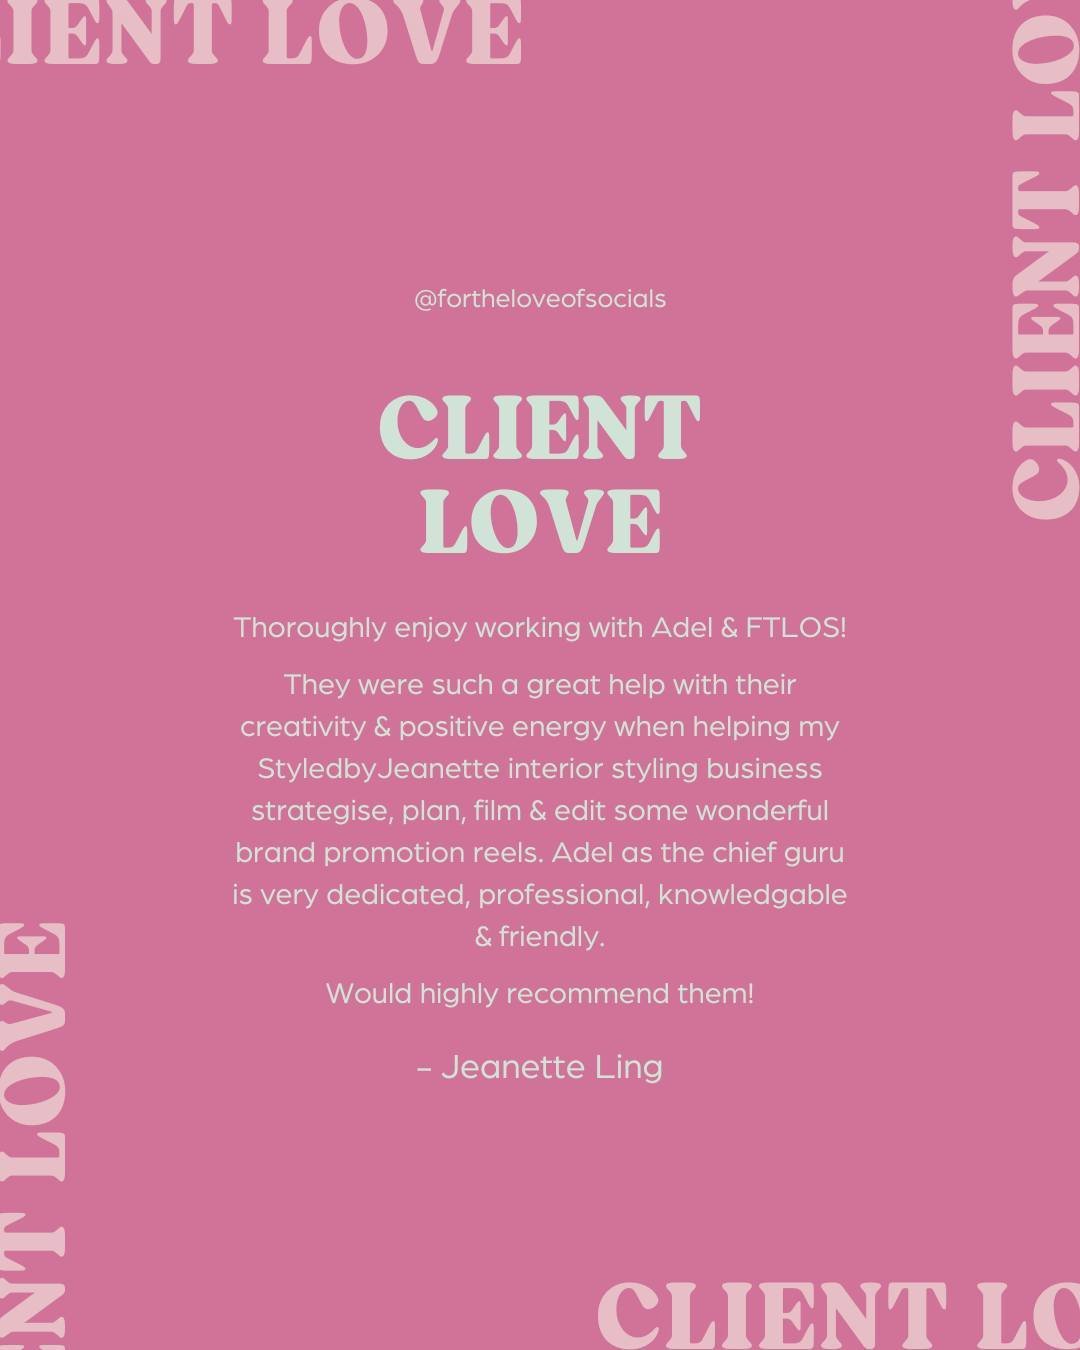 Each and every one of our clients brings something special to us as an agency, whether it's their innovative ideas or their passion for making a difference in their respective industries 💘

We are so lucky to work alongside such incredible businesse